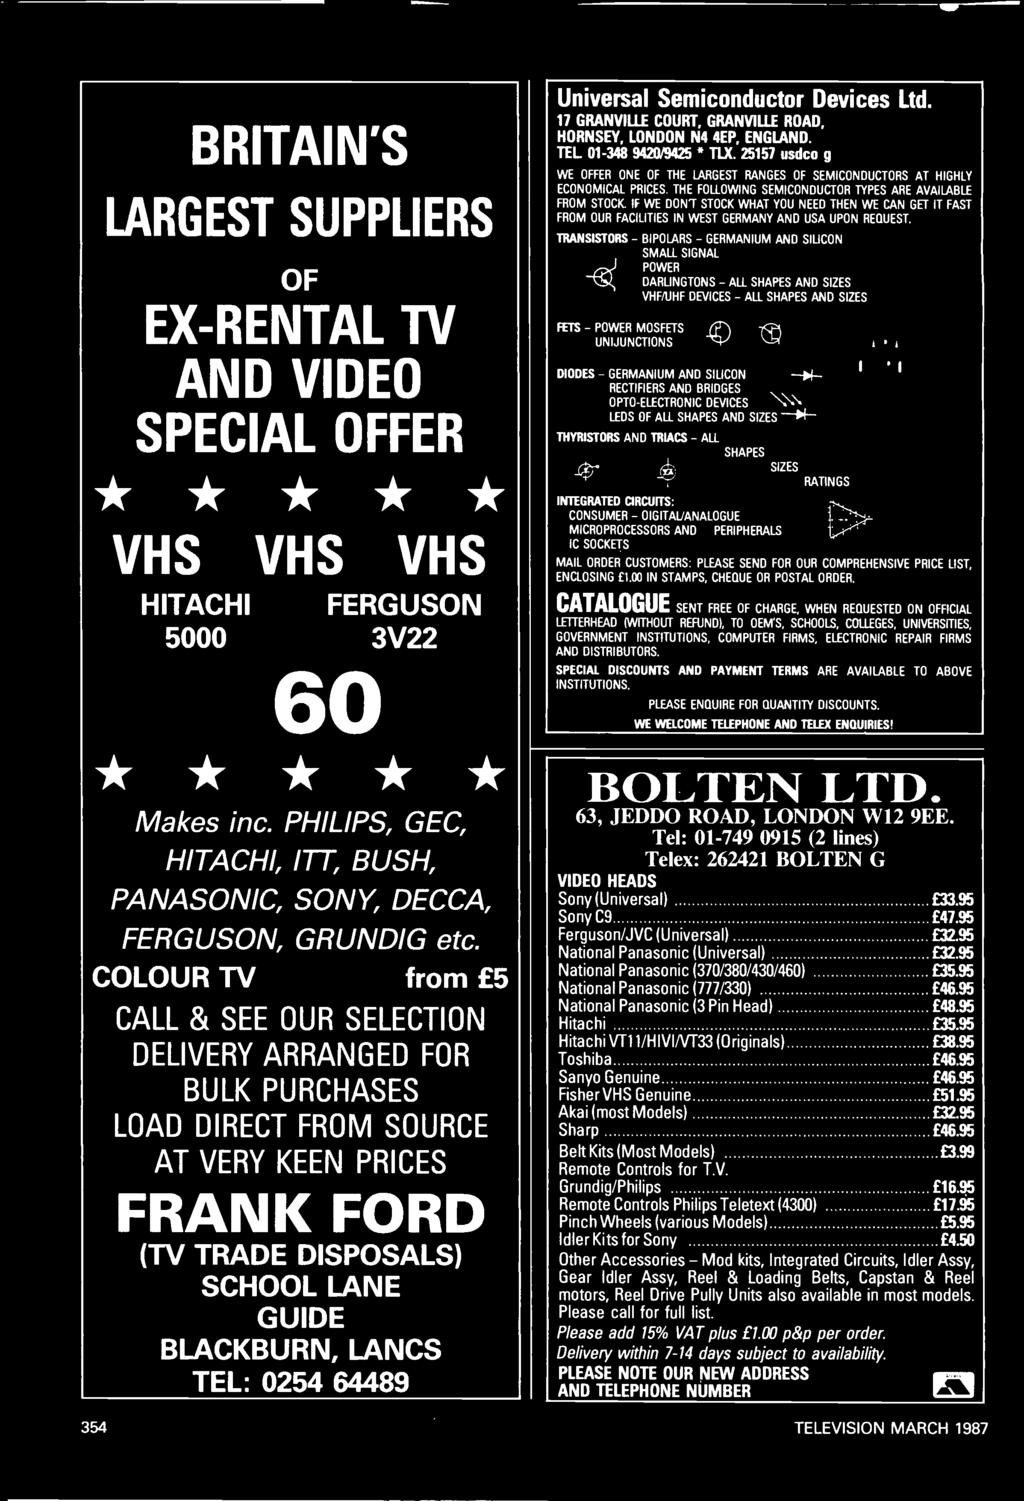 COLOUR TV from 5 CALL & SEE OUR SELECTION DELIVERY ARRANGED FOR BULK PURCHASES LOAD DIRECT FROM SOURCE AT VERY KEEN PRICES FRANK FORD (TV TRADE DISPOSALS) SCHOOL LANE GUIDE BLACKBURN, LANCS TEL: 0254